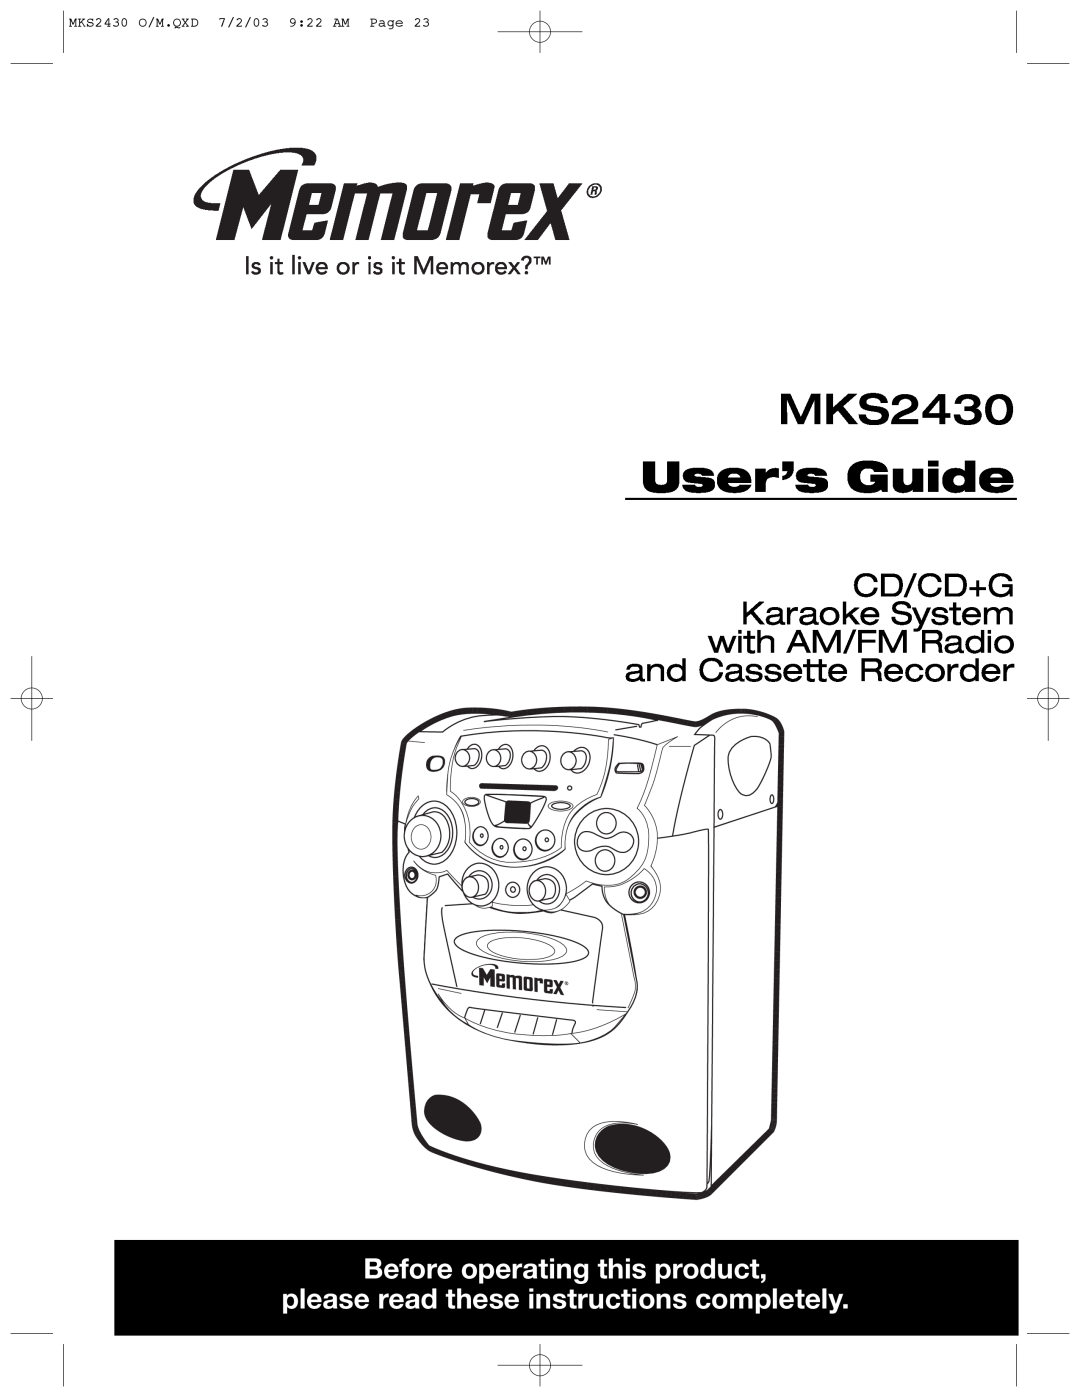 Memorex MKS2430 manual Before operating this product, please read these instructions completely, User’s Guide 